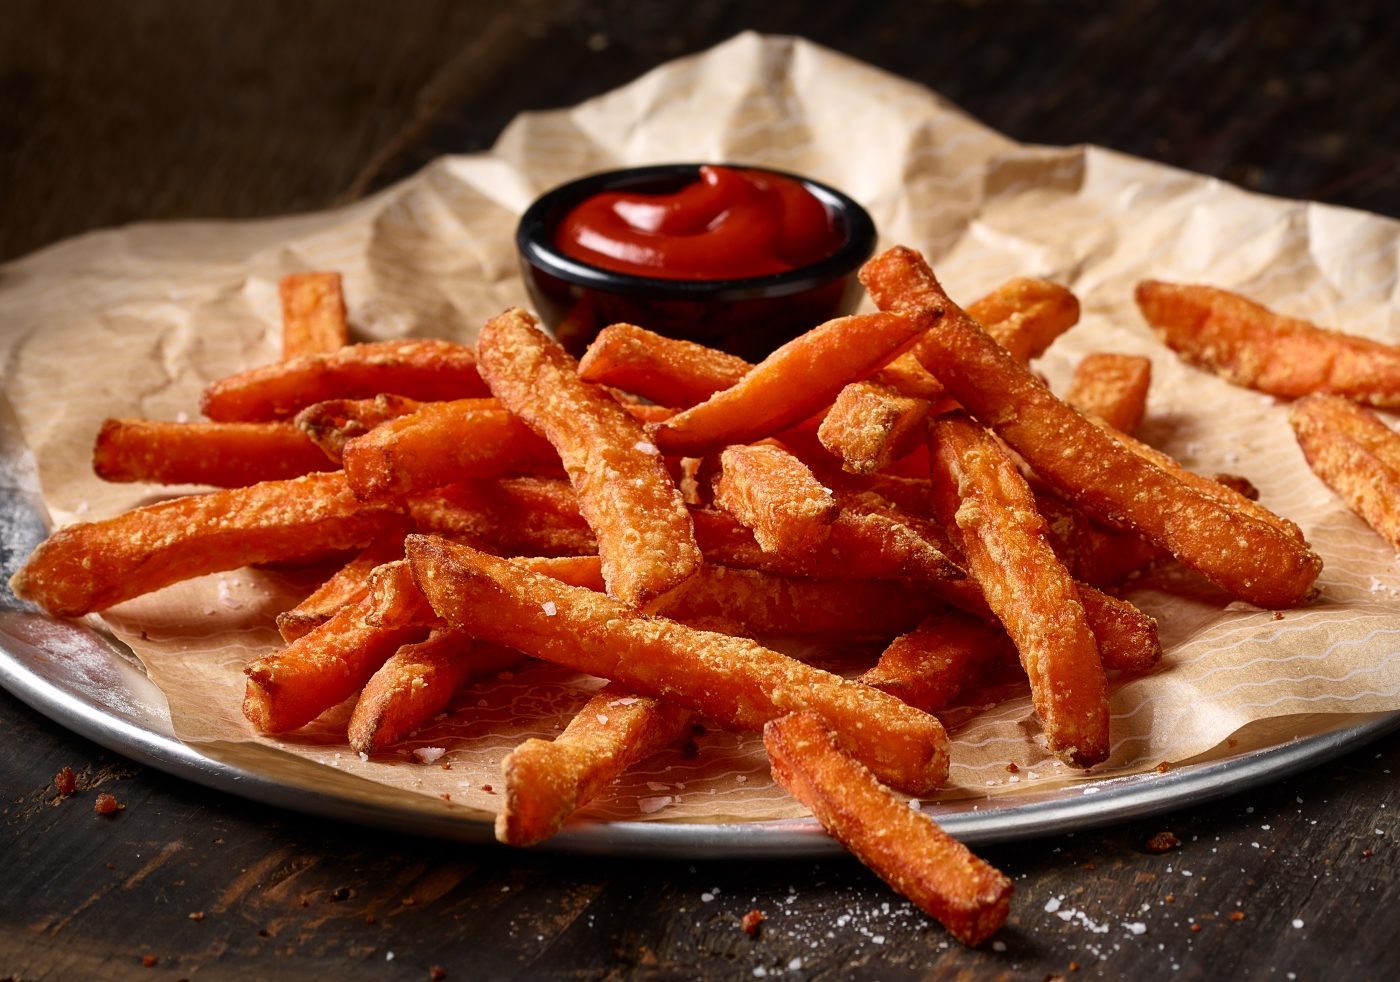 freshly prepared sweet potatoes french fries lieing on a paper with ketchup